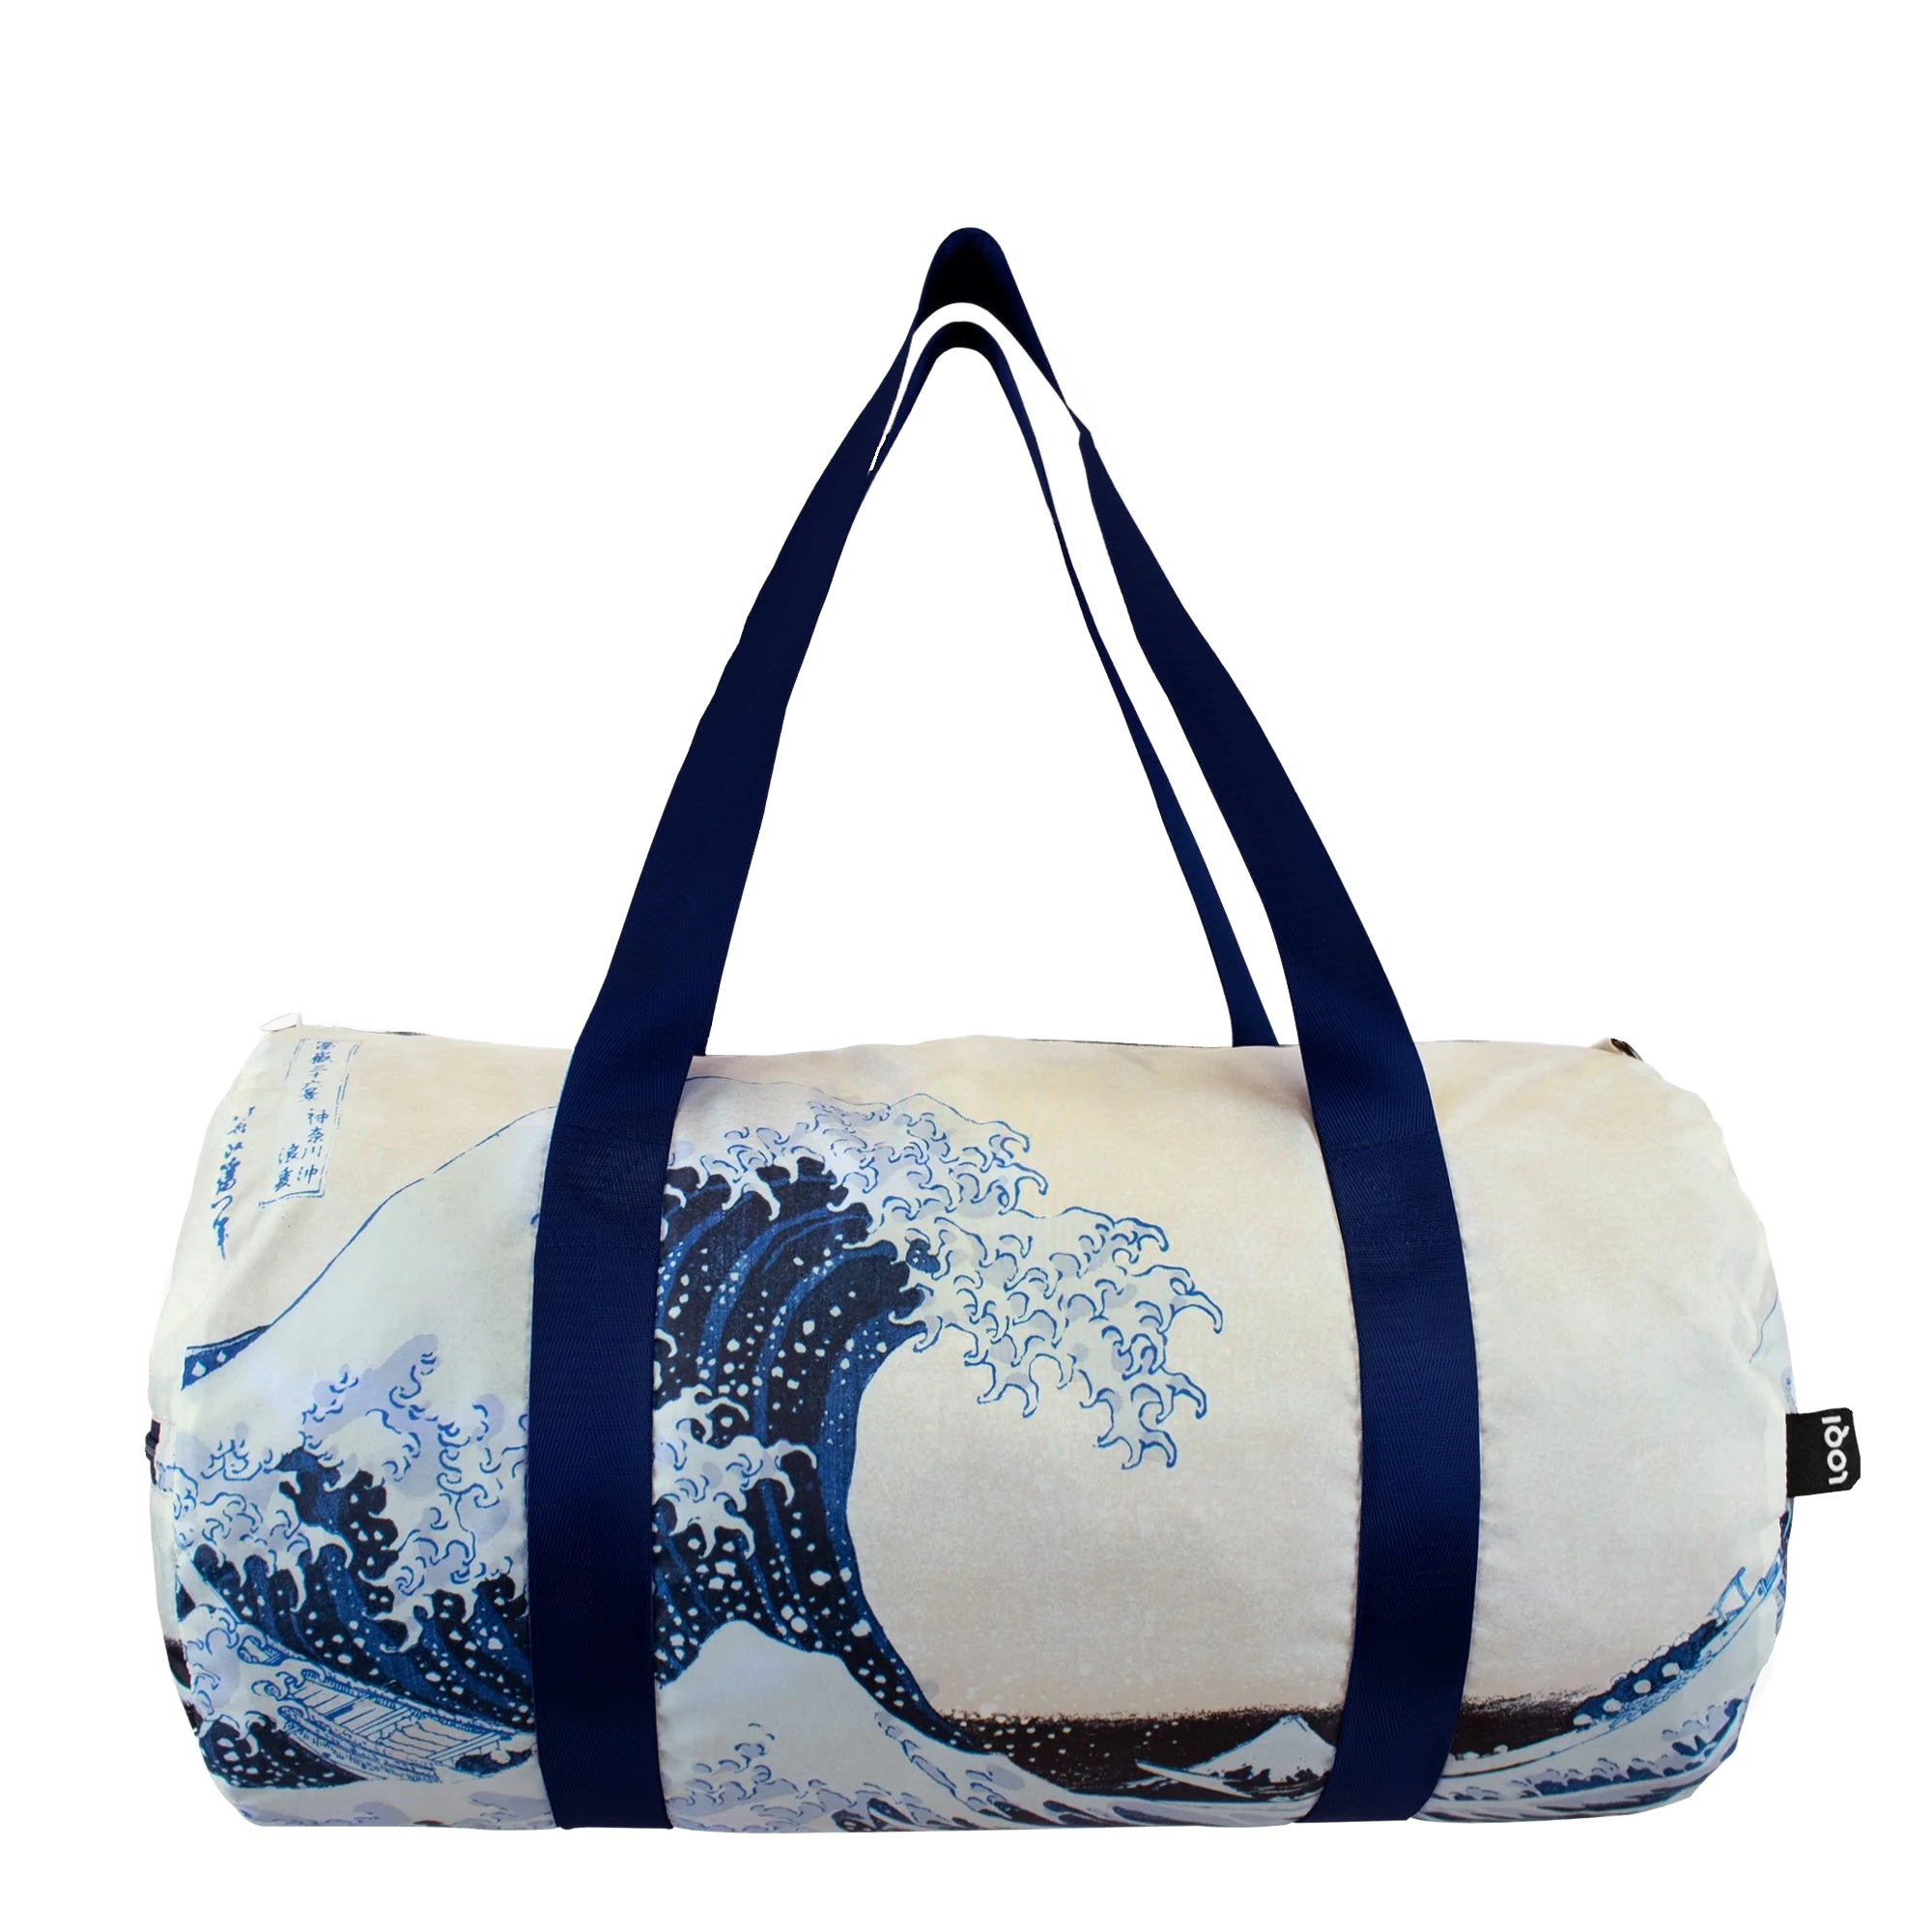 LOQI Recycled Weekender Tote Bag – The Great Wave